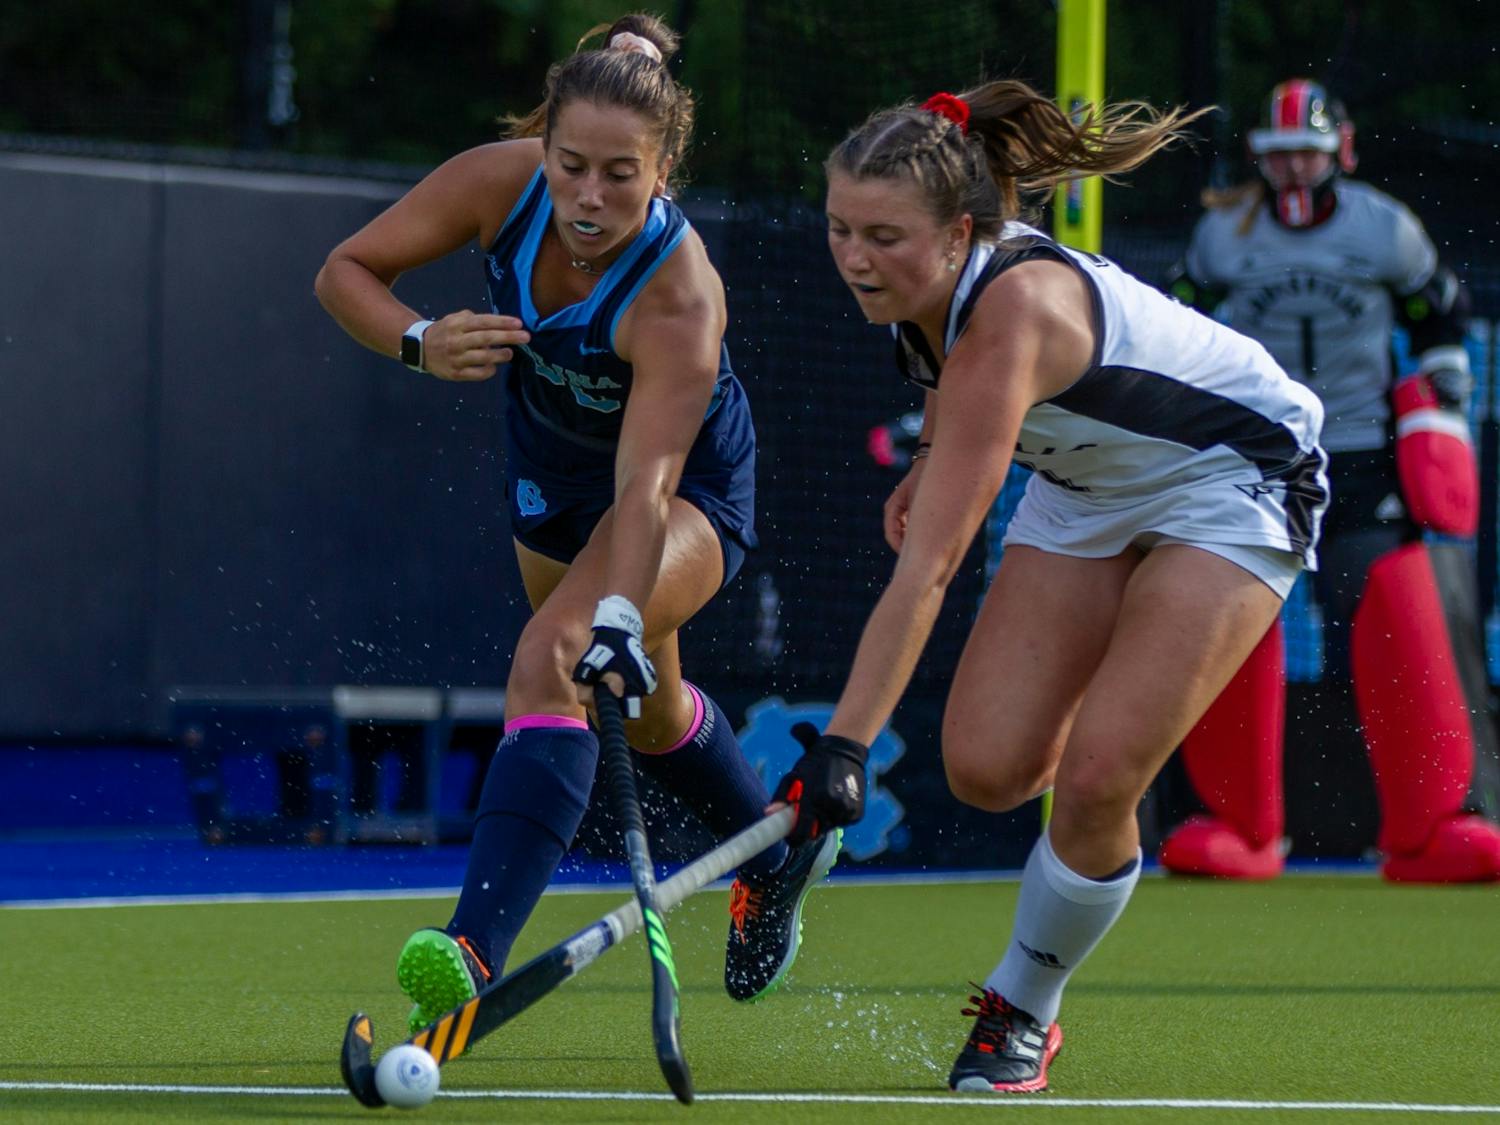 First-year forward Kennedy Cliggett (36) fights for the ball at the field hockey game against Louisville on Oct. 22 at the Karen Shelton Stadium. UNC lost 2-3 in overtime.